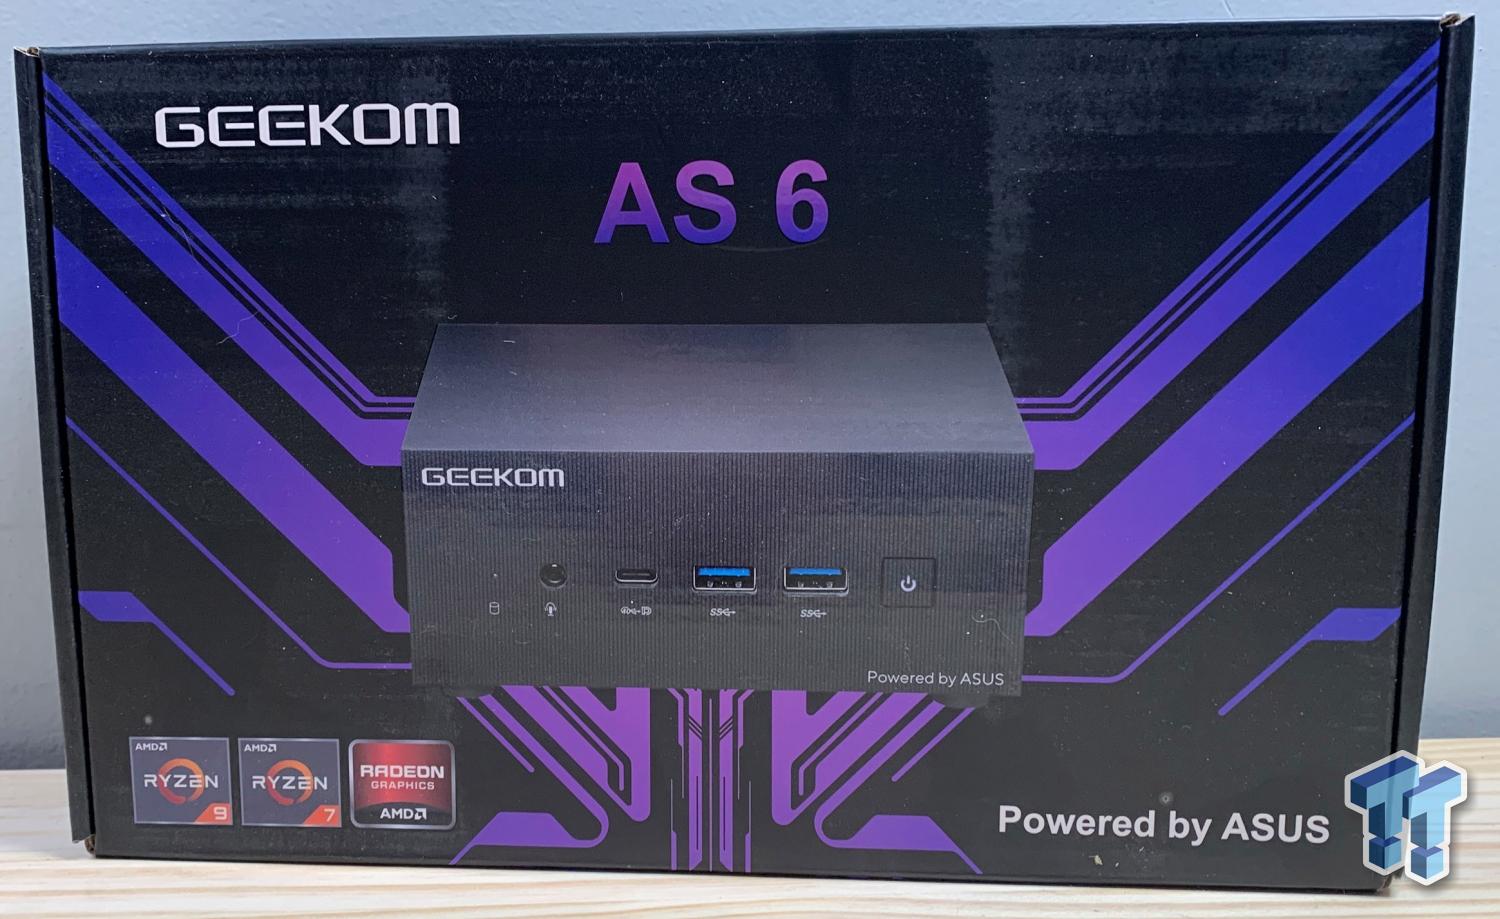 Geekom AS6 Mini PC Review: 3 Months Later